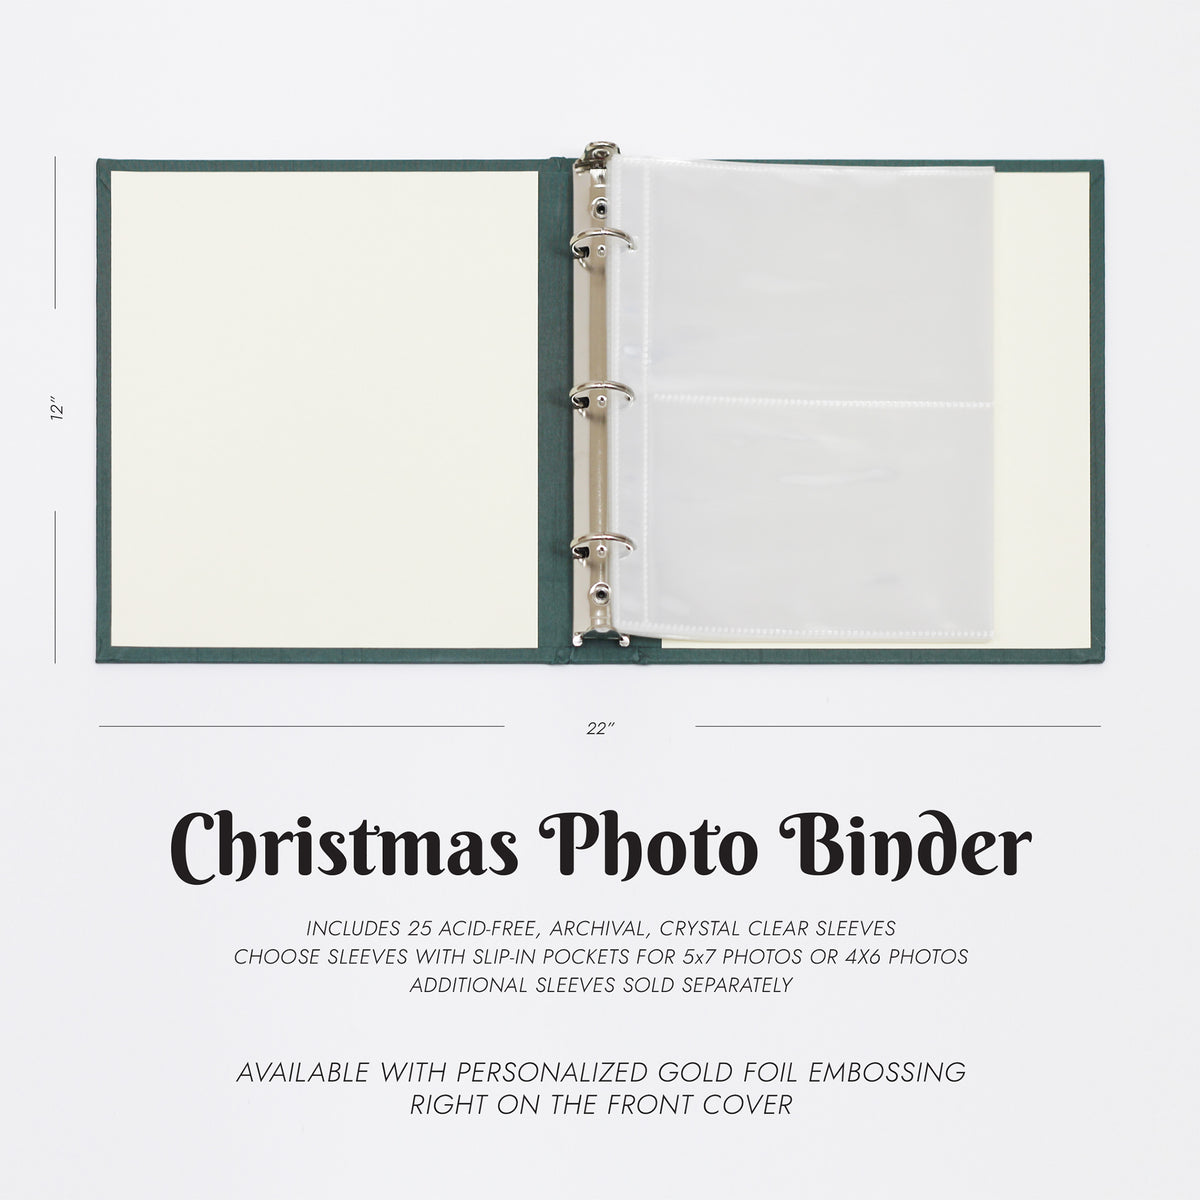 Large Christmas Photo Binder with Champagne Silk Cover for 4x6 or 5x7 Photos